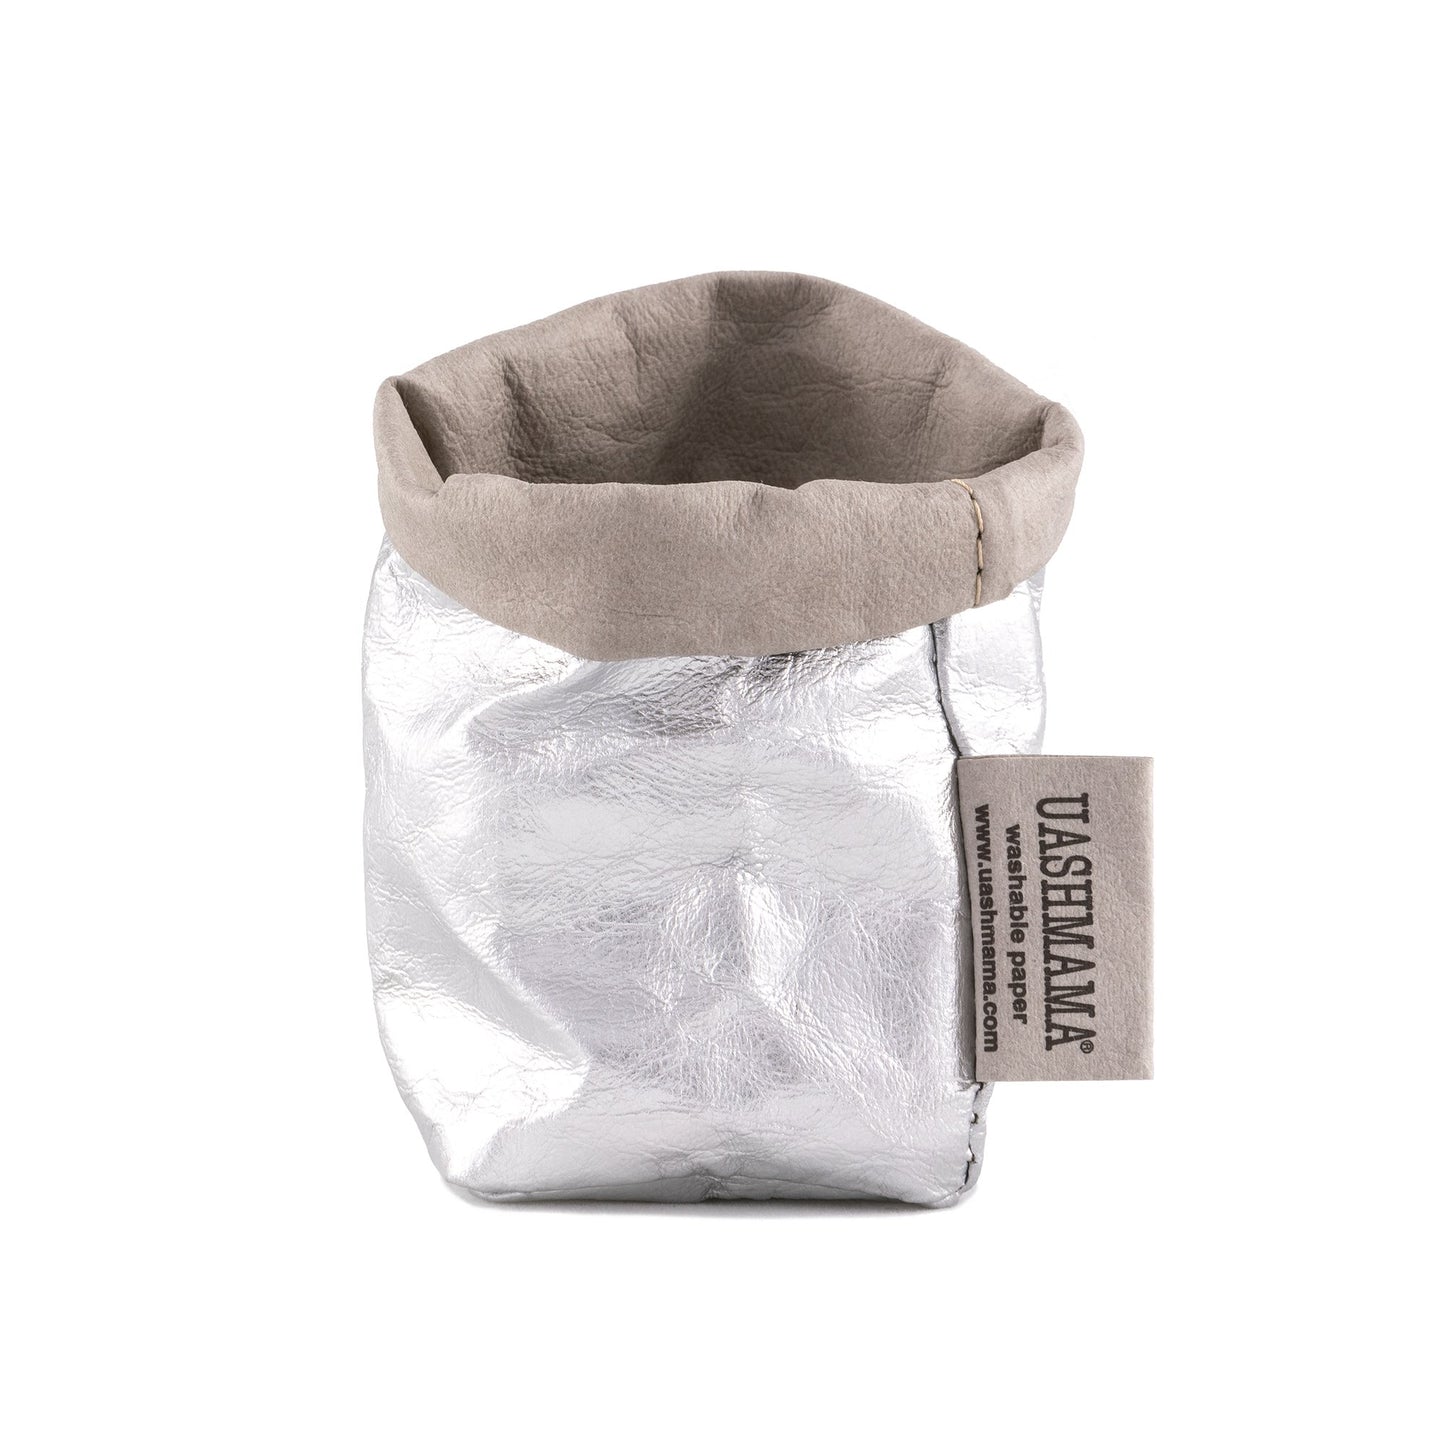 A washable paper bag is shown. The bag is rolled down at the top and features a UASHMAMA logo label on the bottom left corner. The bag pictured is the extra small size in metallic silver.